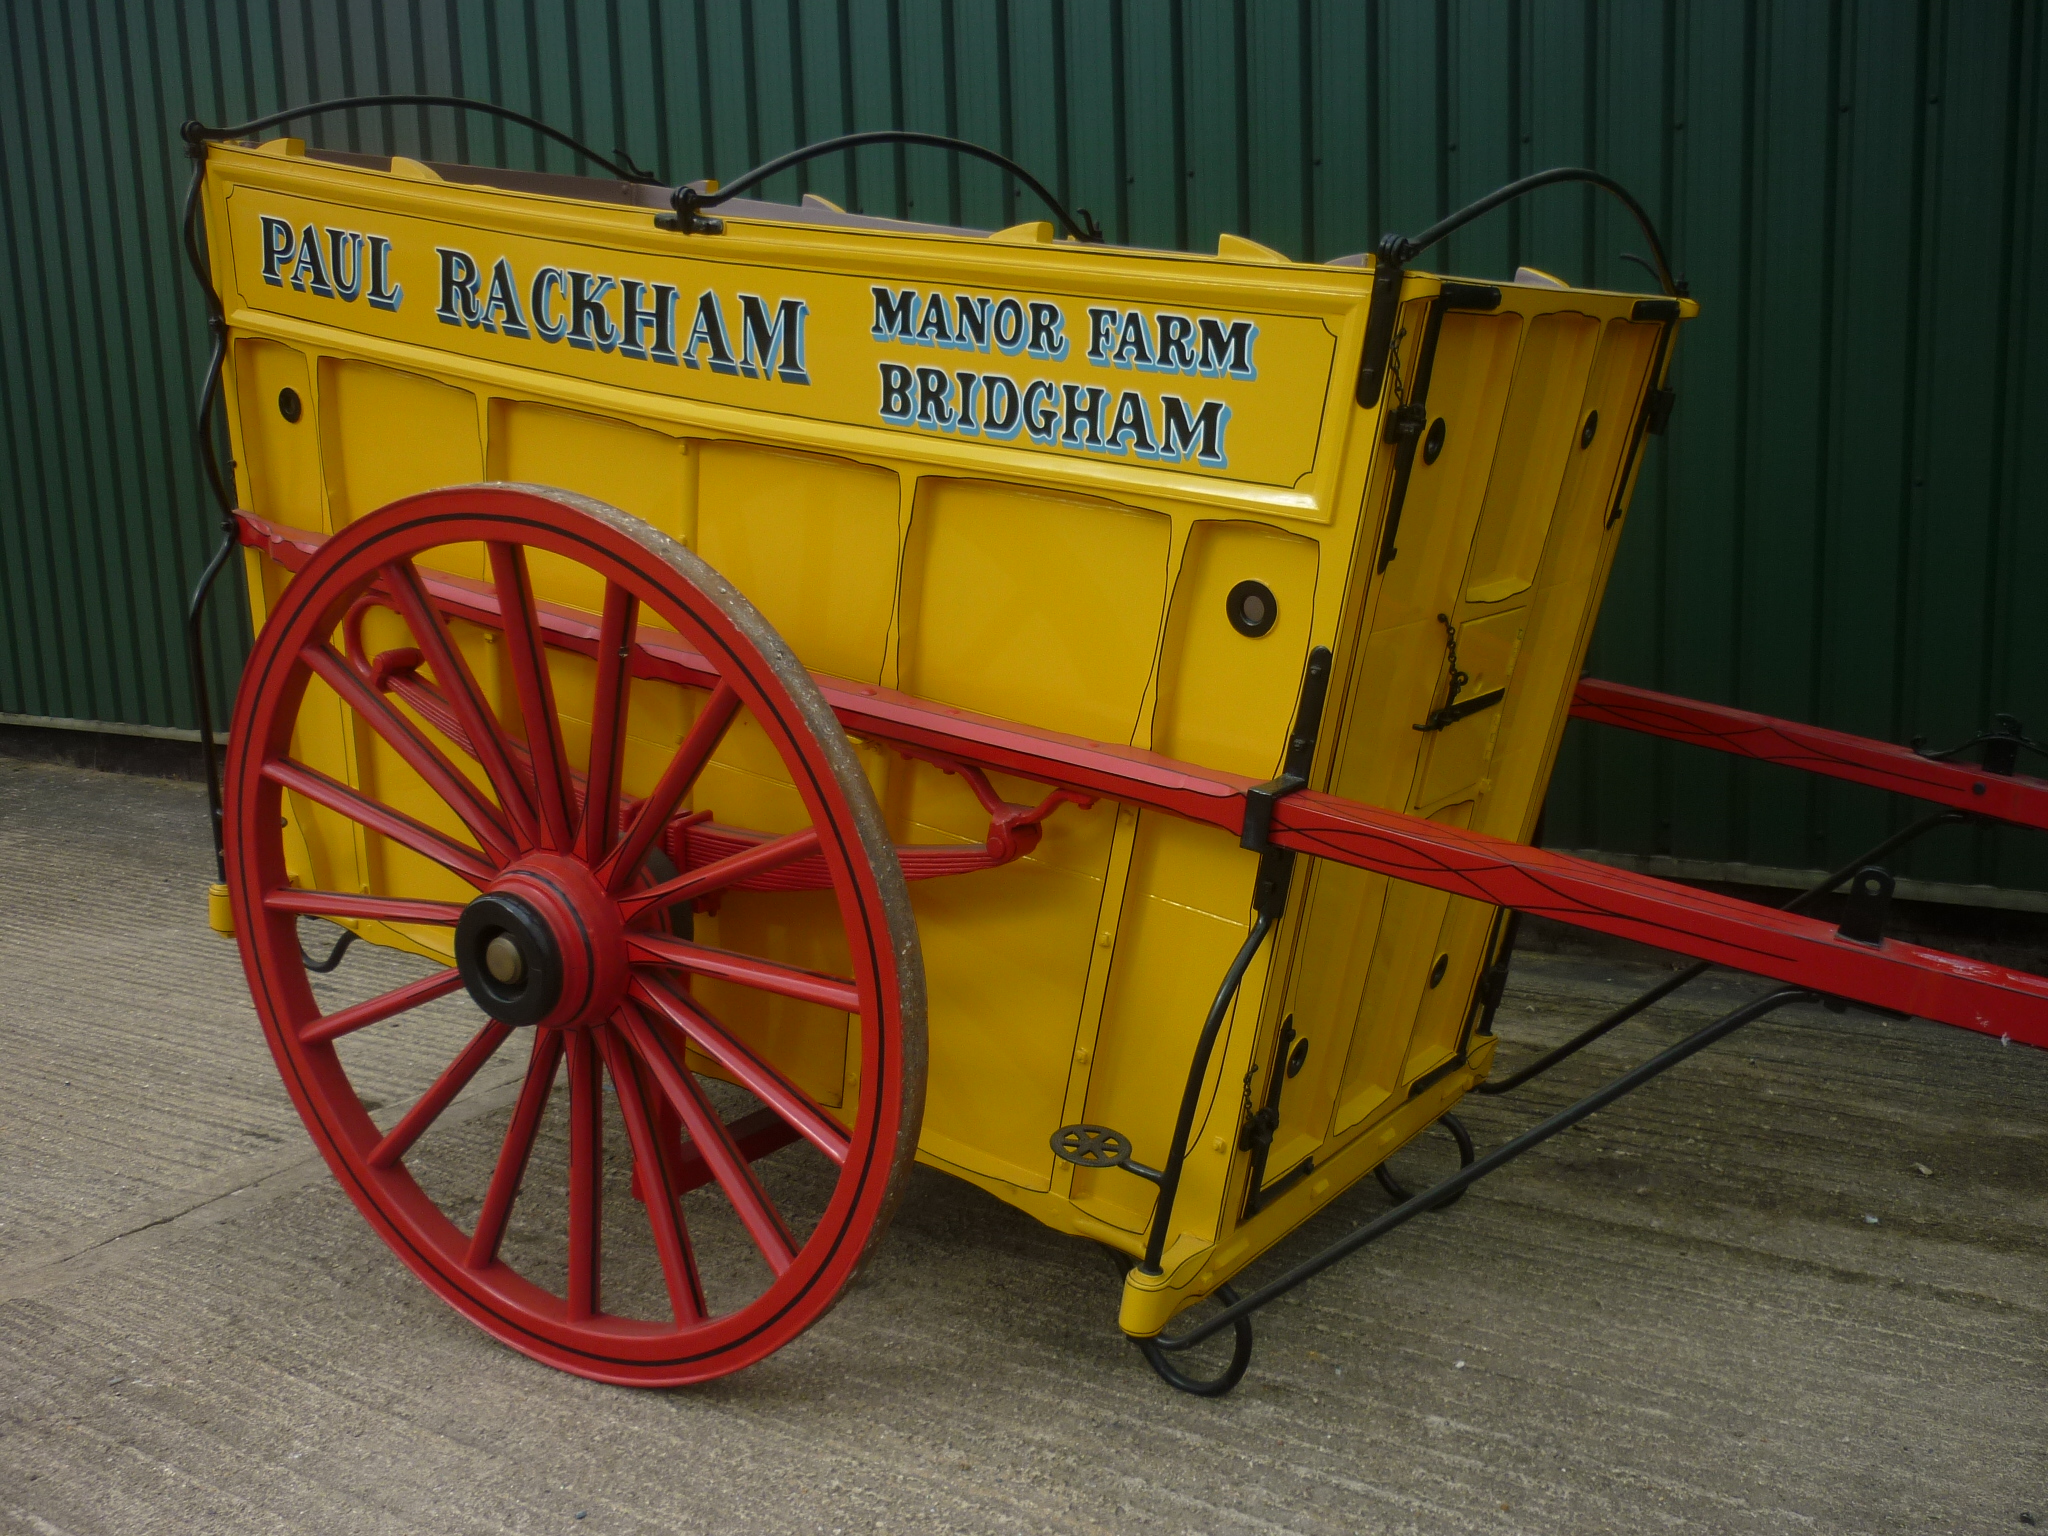 HORSE AMBULANCE or KNACKER'S CART originally used at Epsom Racecourse from 1895 to 1905 for